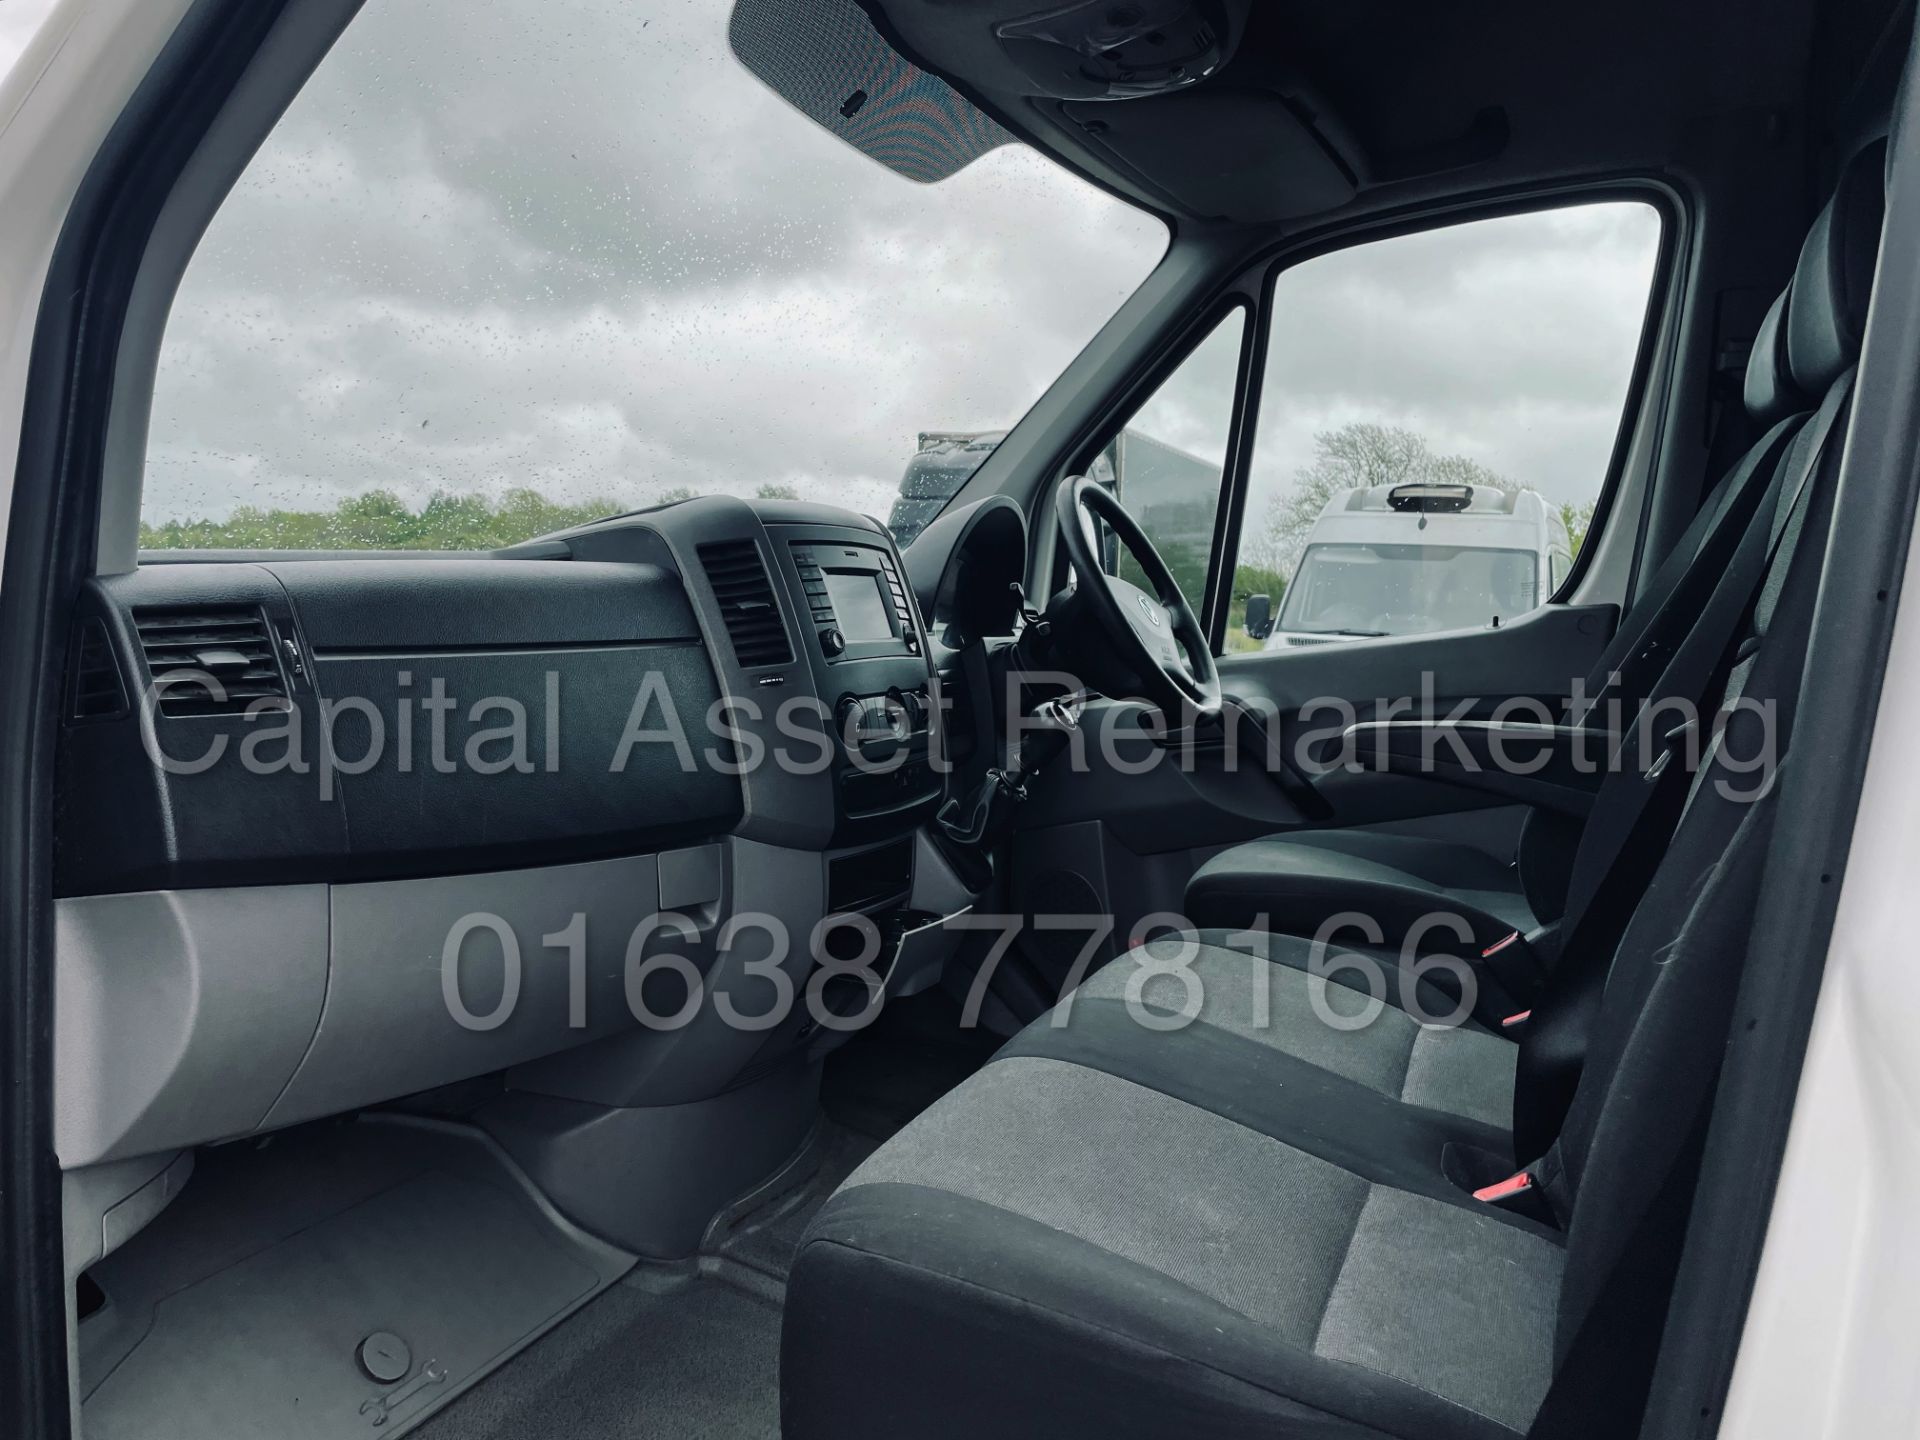 (On Sale) VOLKSWAGEN CRAFTER *LWB HI-ROOF* (2017 - EURO 6) '2.0 TDI BMT - 6 SPEED' *CRUISE CONTROL* - Image 19 of 39